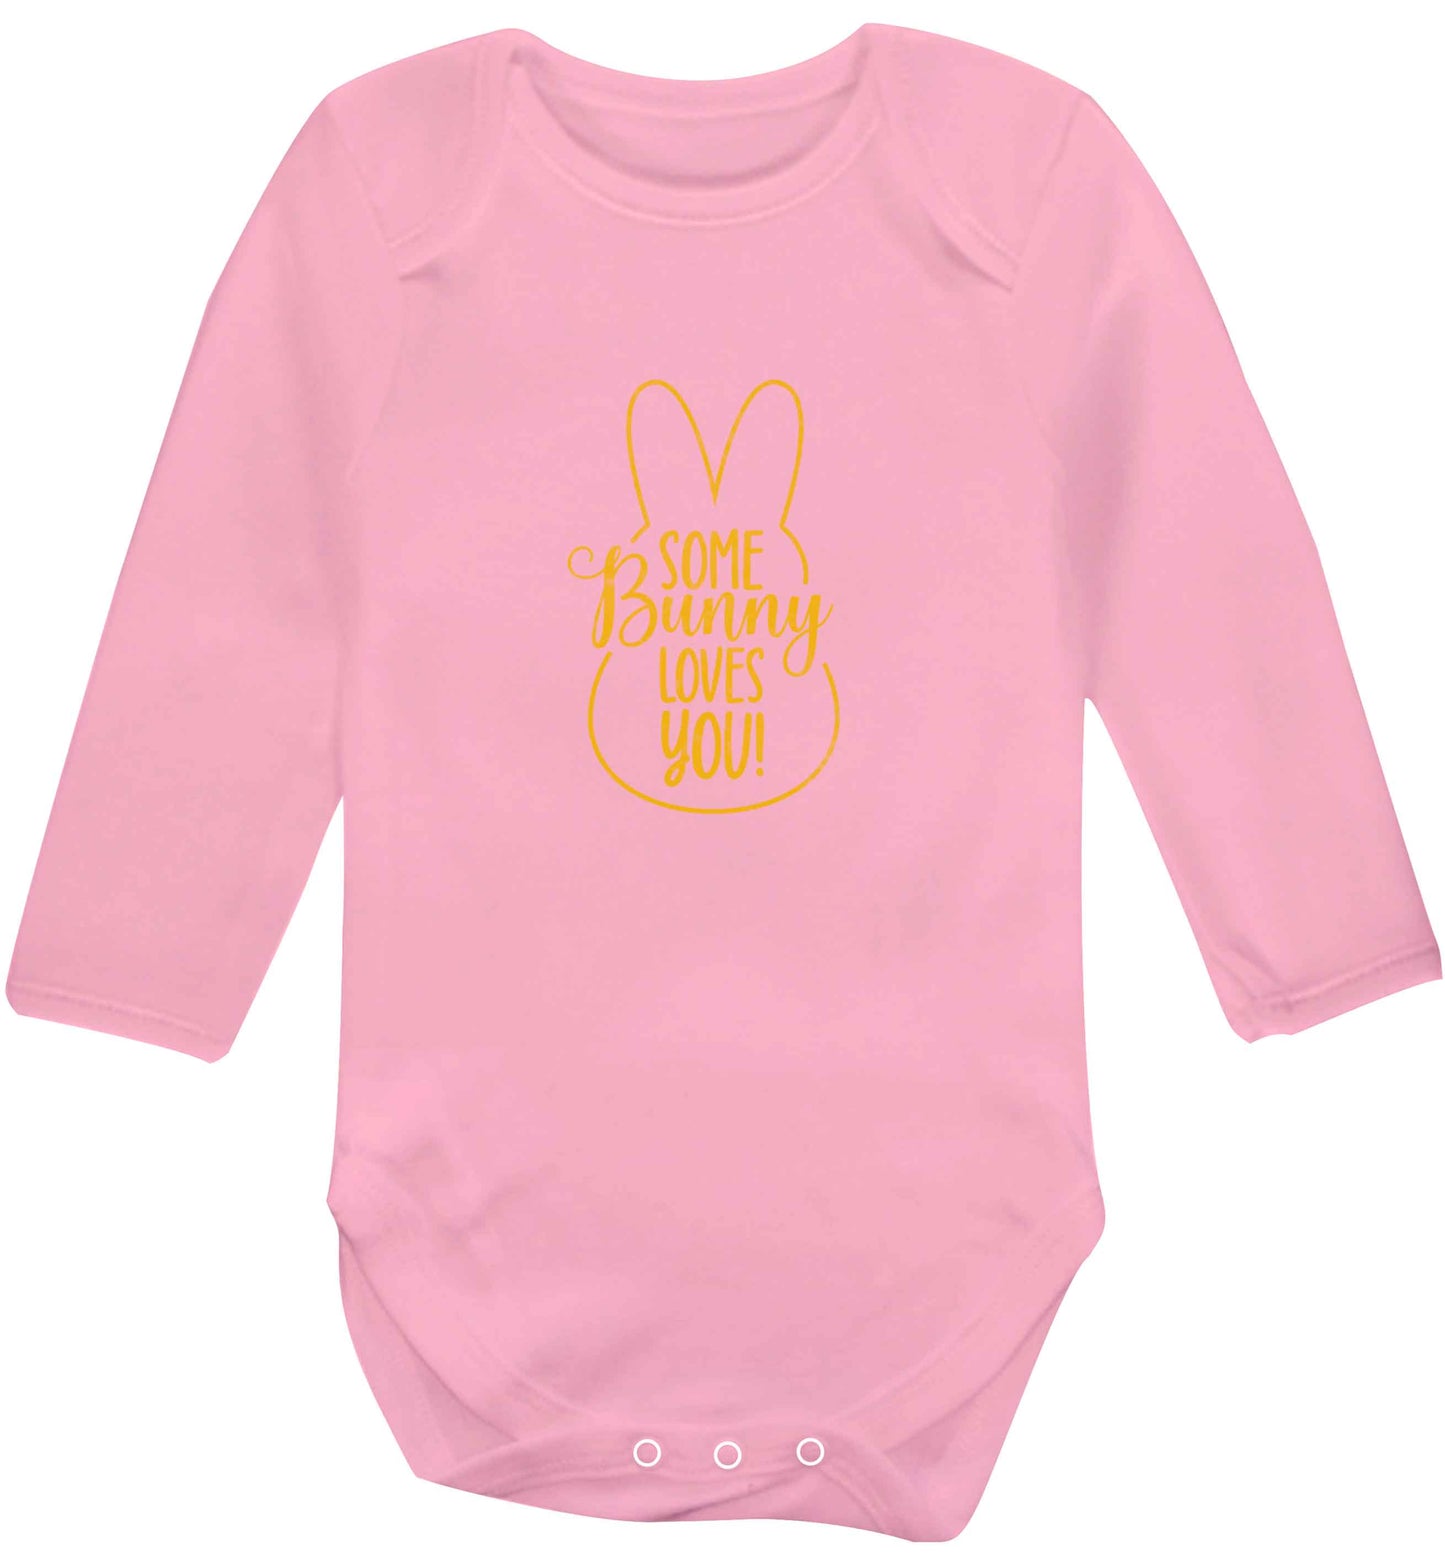 Some bunny loves you baby vest long sleeved pale pink 6-12 months